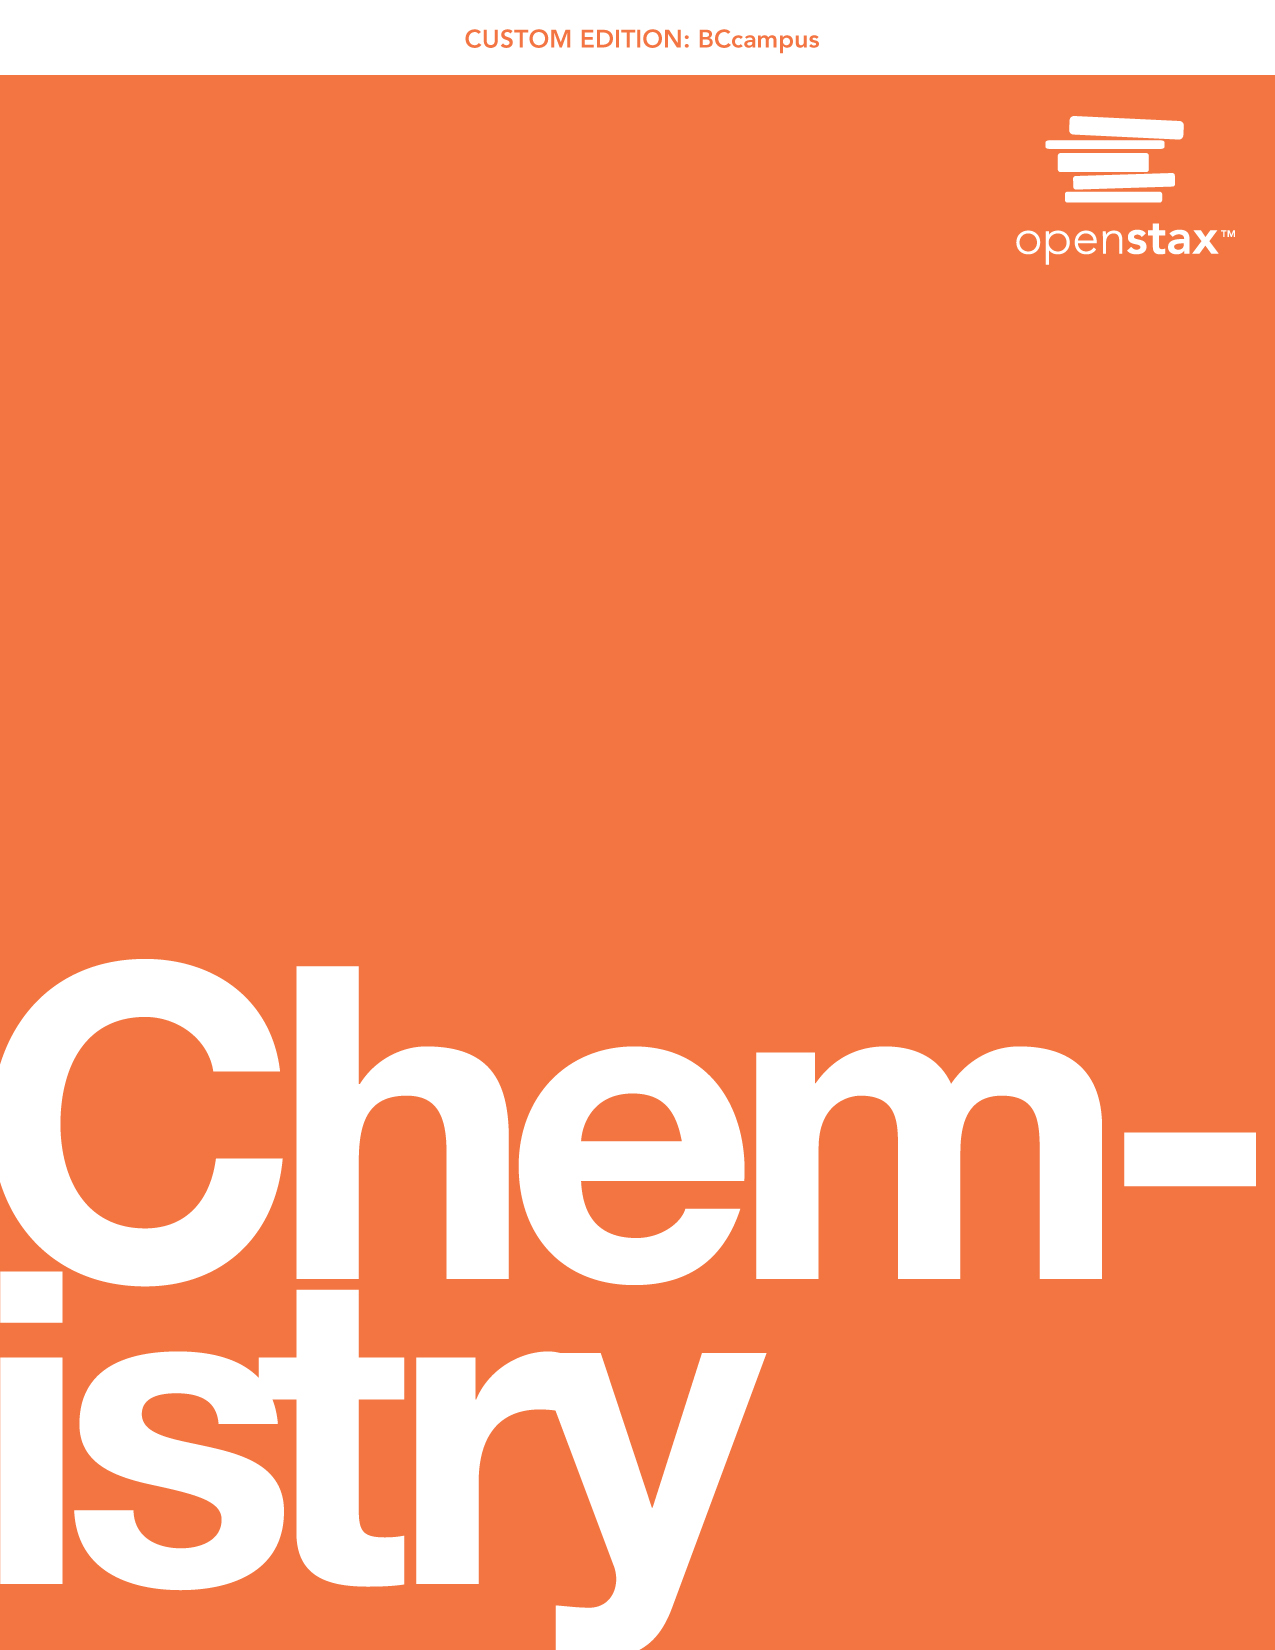 Cover image for Chemistry